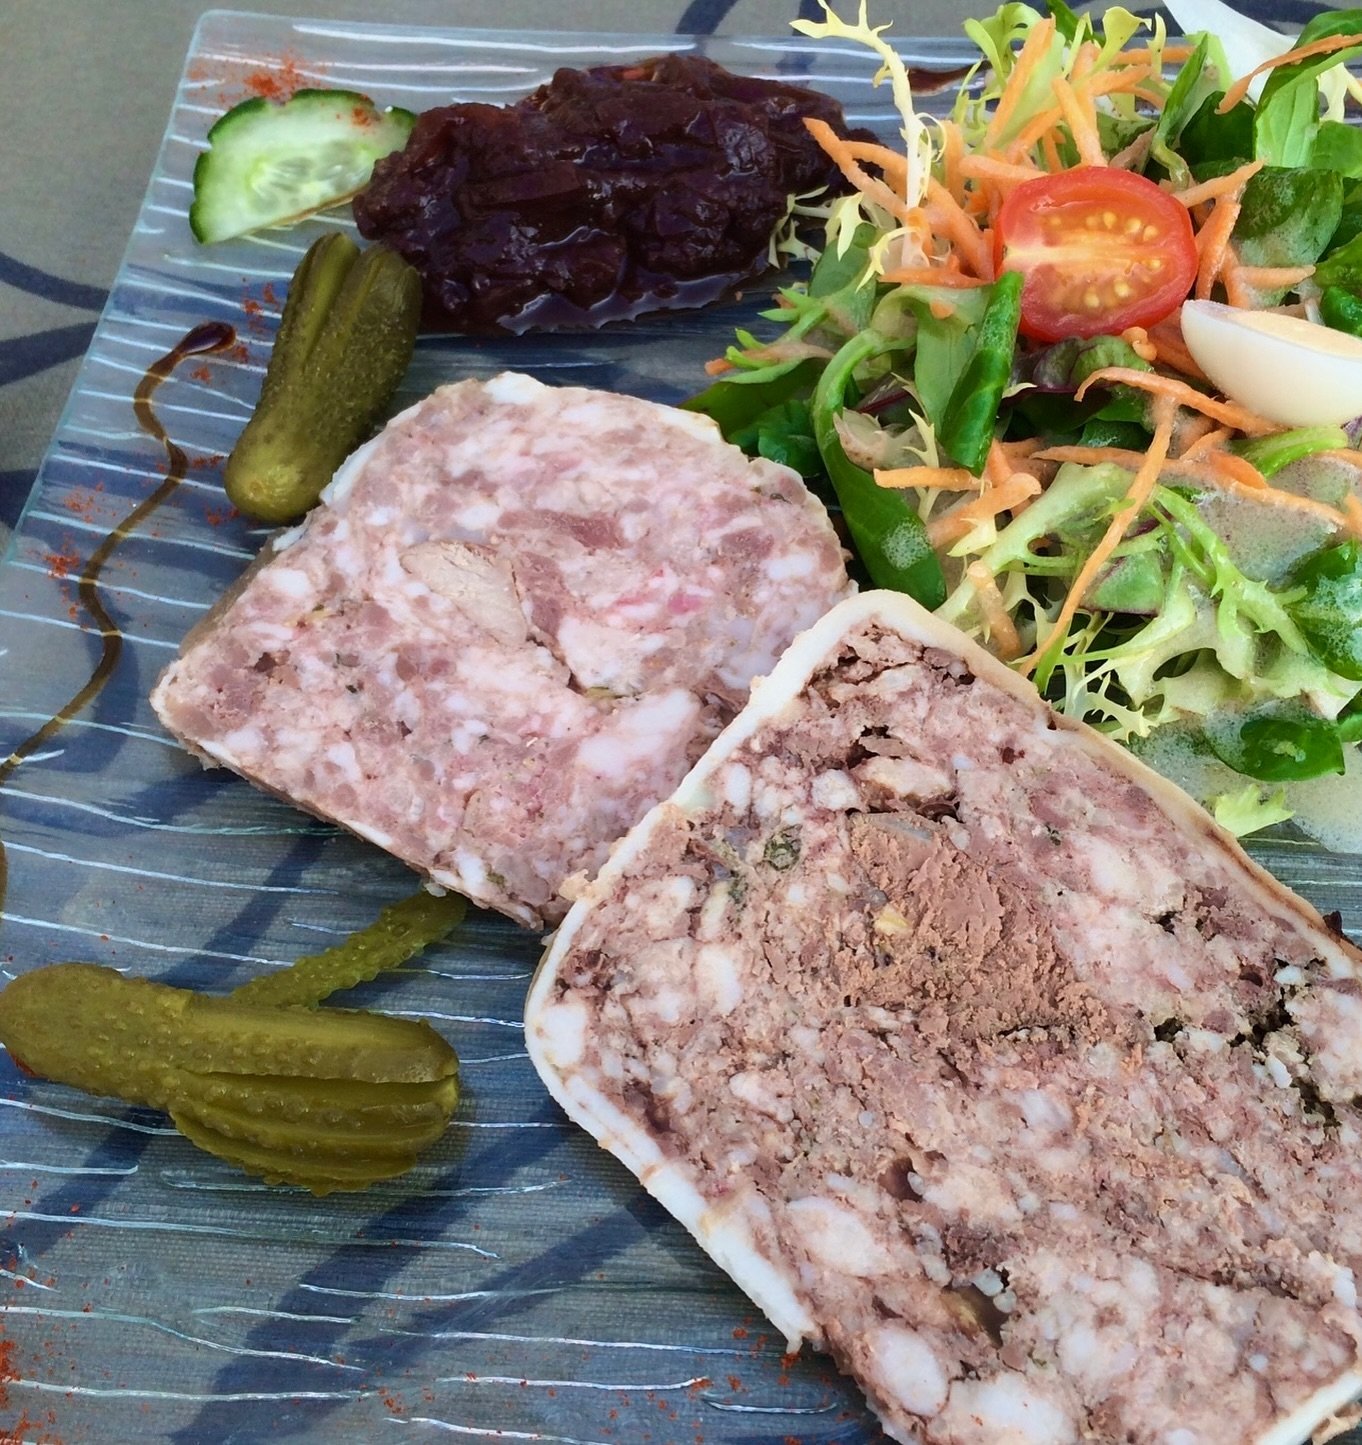 ~~ A yummy slice of French terrine ~~
One of these days I will have the time to make my own!
But for now, there is homemade chutney on the plate and cornichons growing in the Potager &hellip;.

#terrine #terrinedecampagne #yummy #frenchfoodlovers #mi